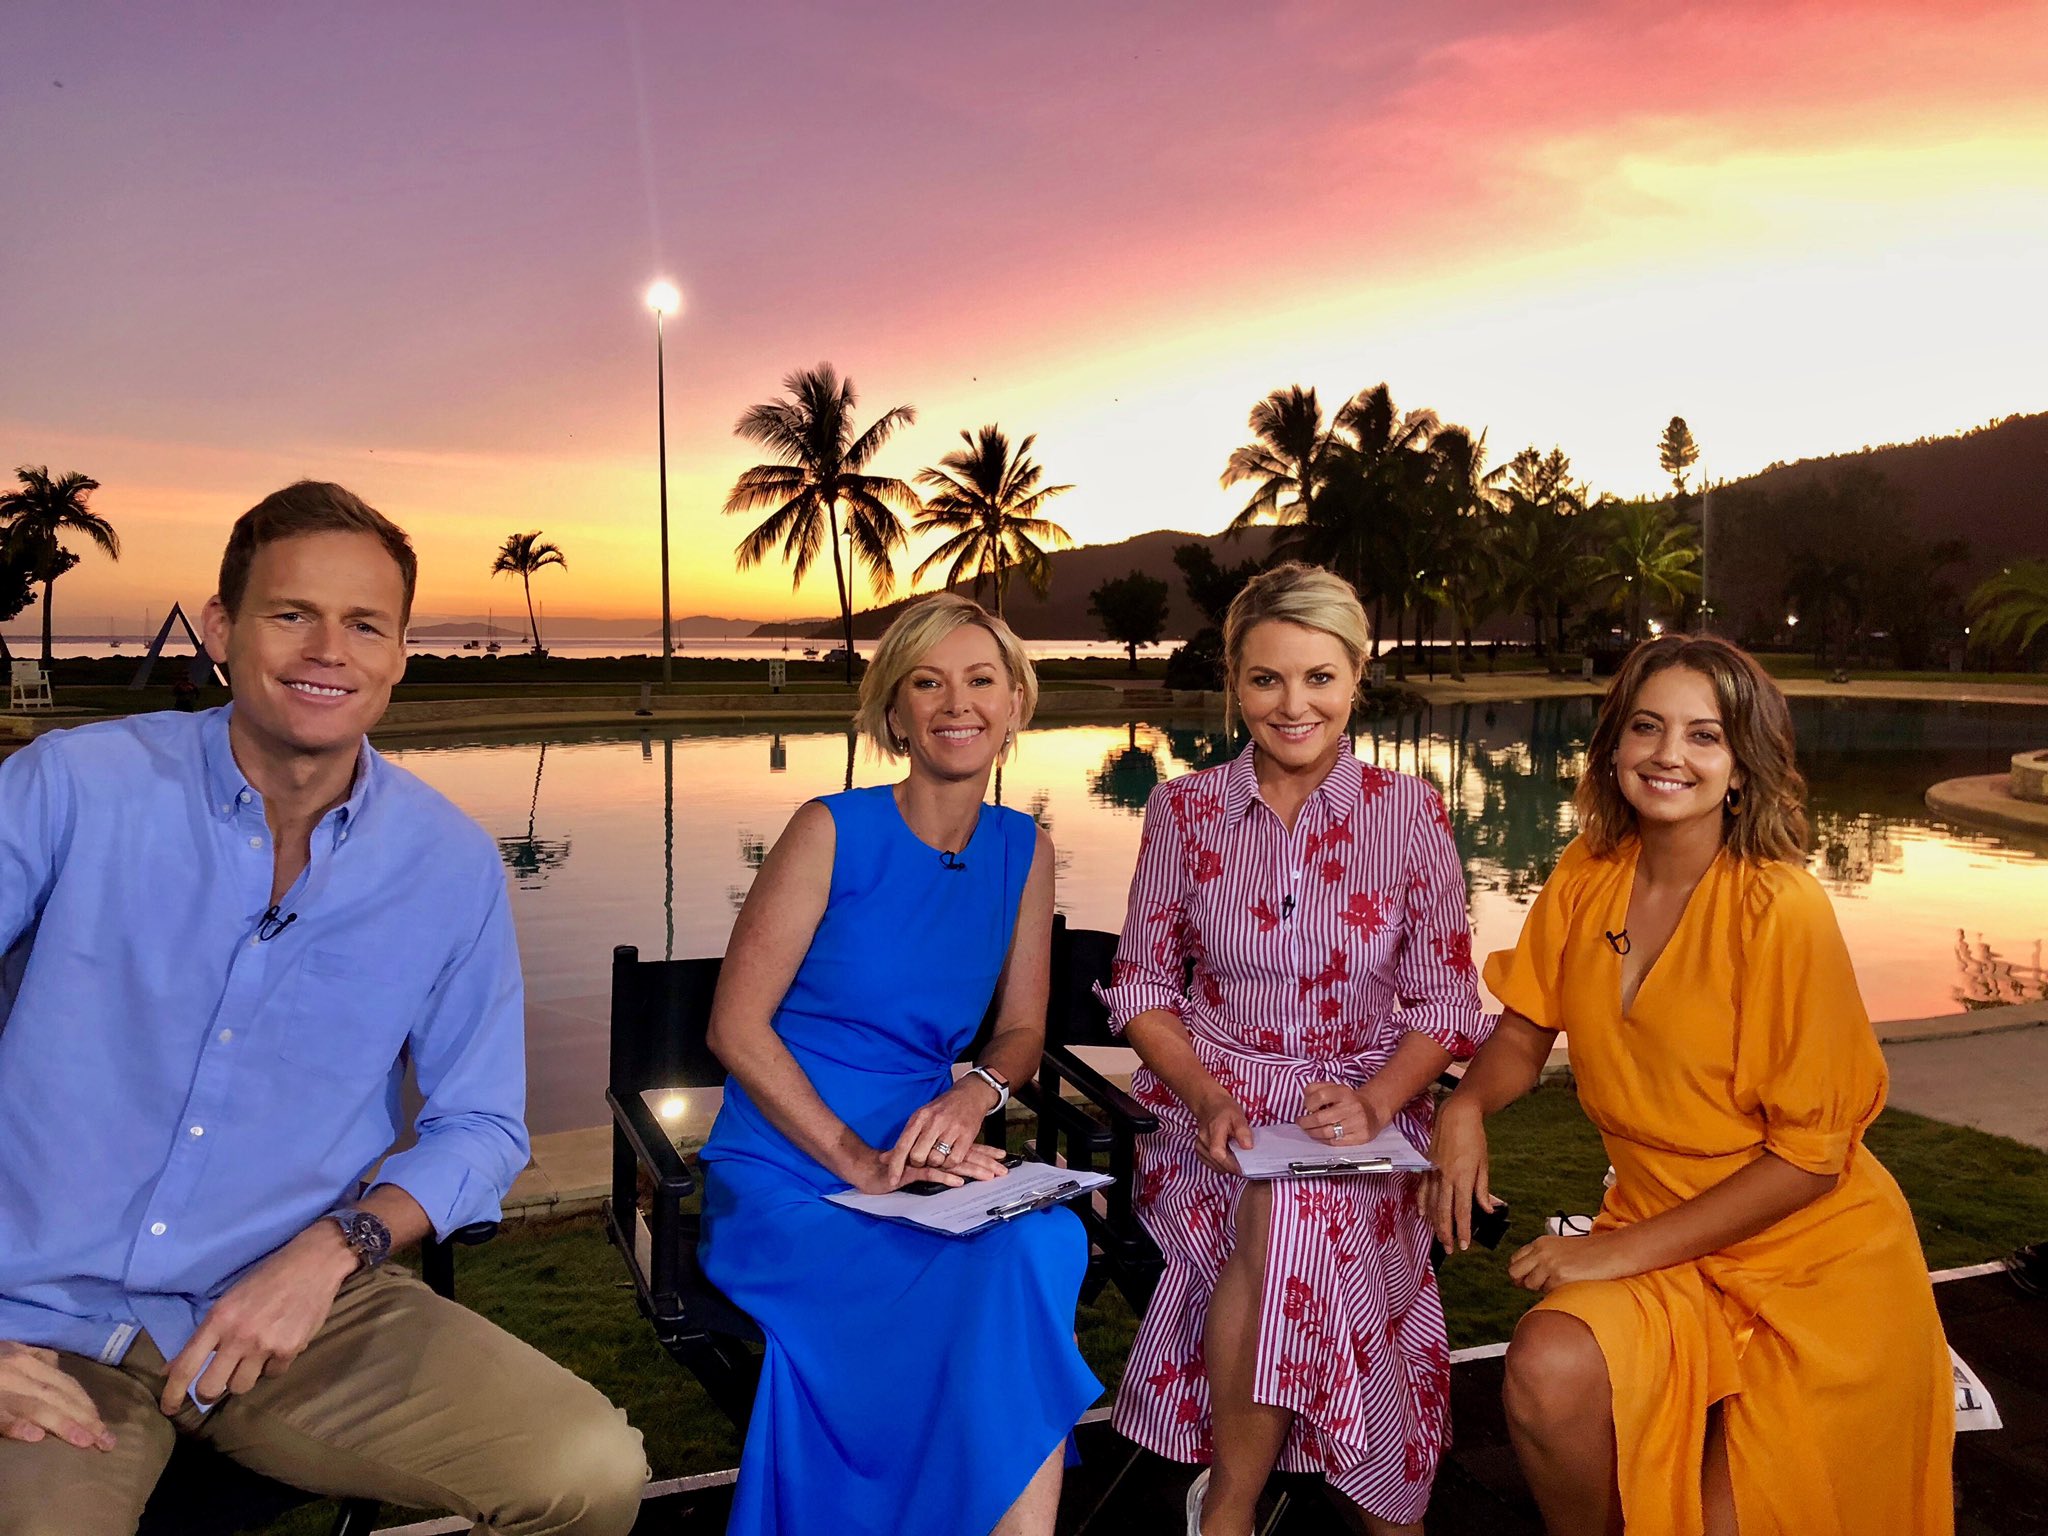   The TODAY show was broadcasting in ‘paradise’ this week but their ratings were from hell  